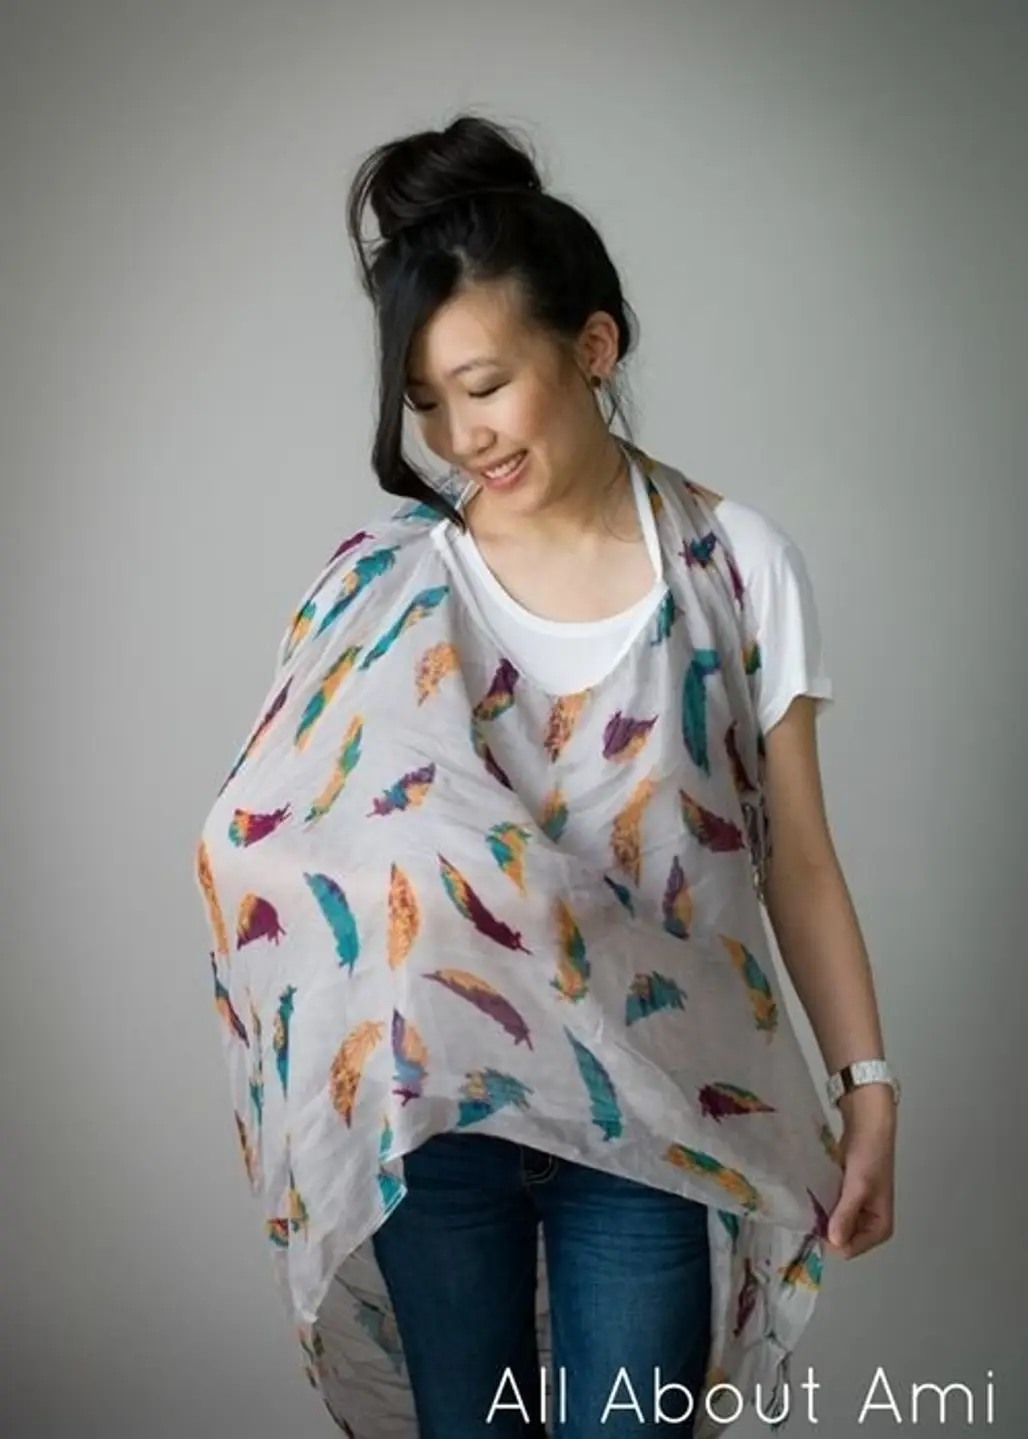 Nursing Cover That Doubles as a Scarf